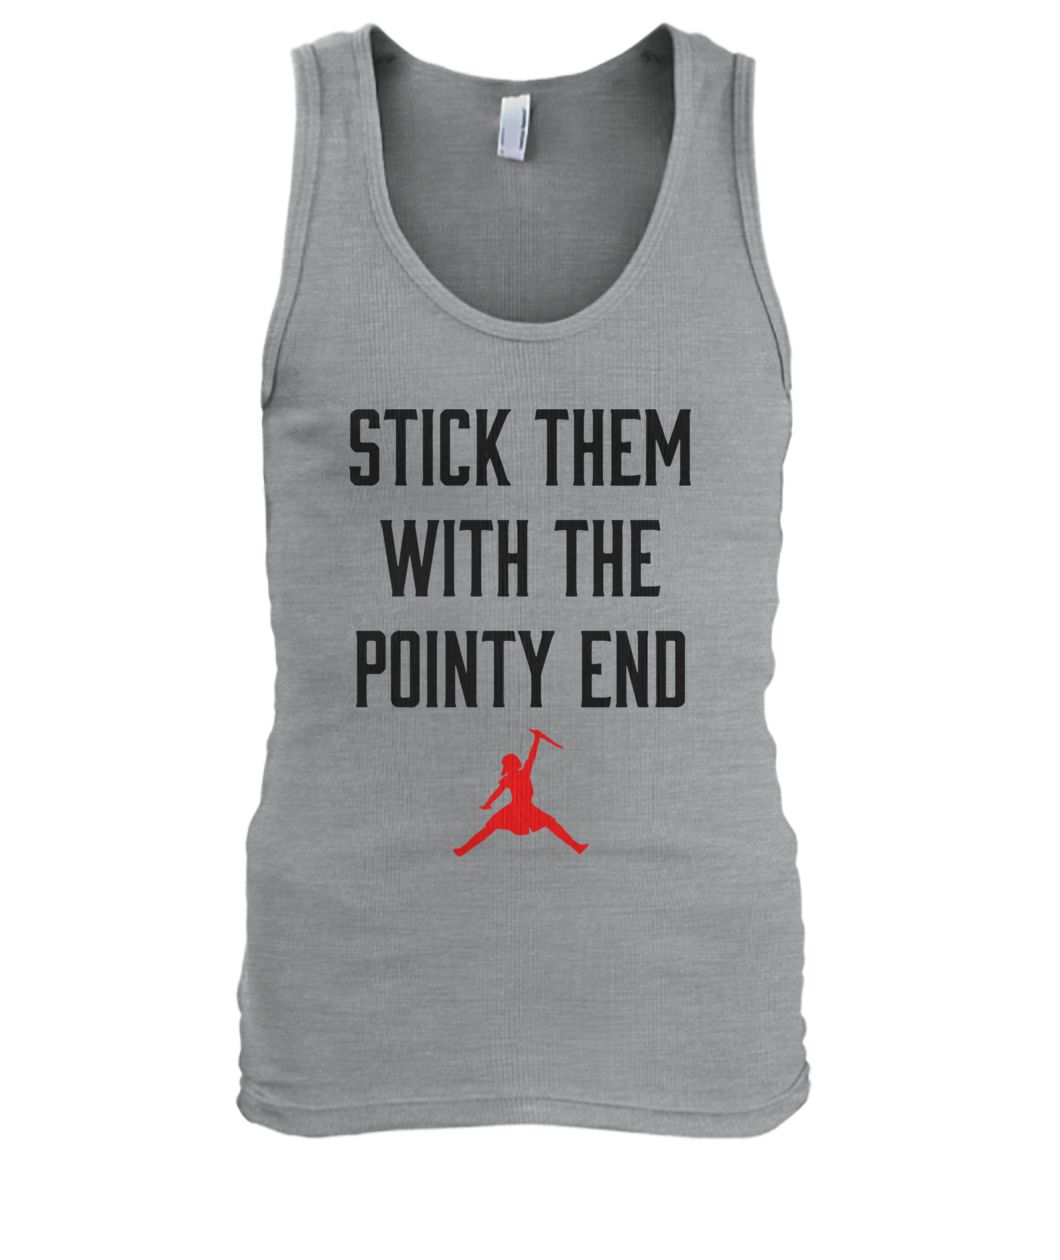 Game of thrones arya stark air jordan stick them with the pointy end men's tank top